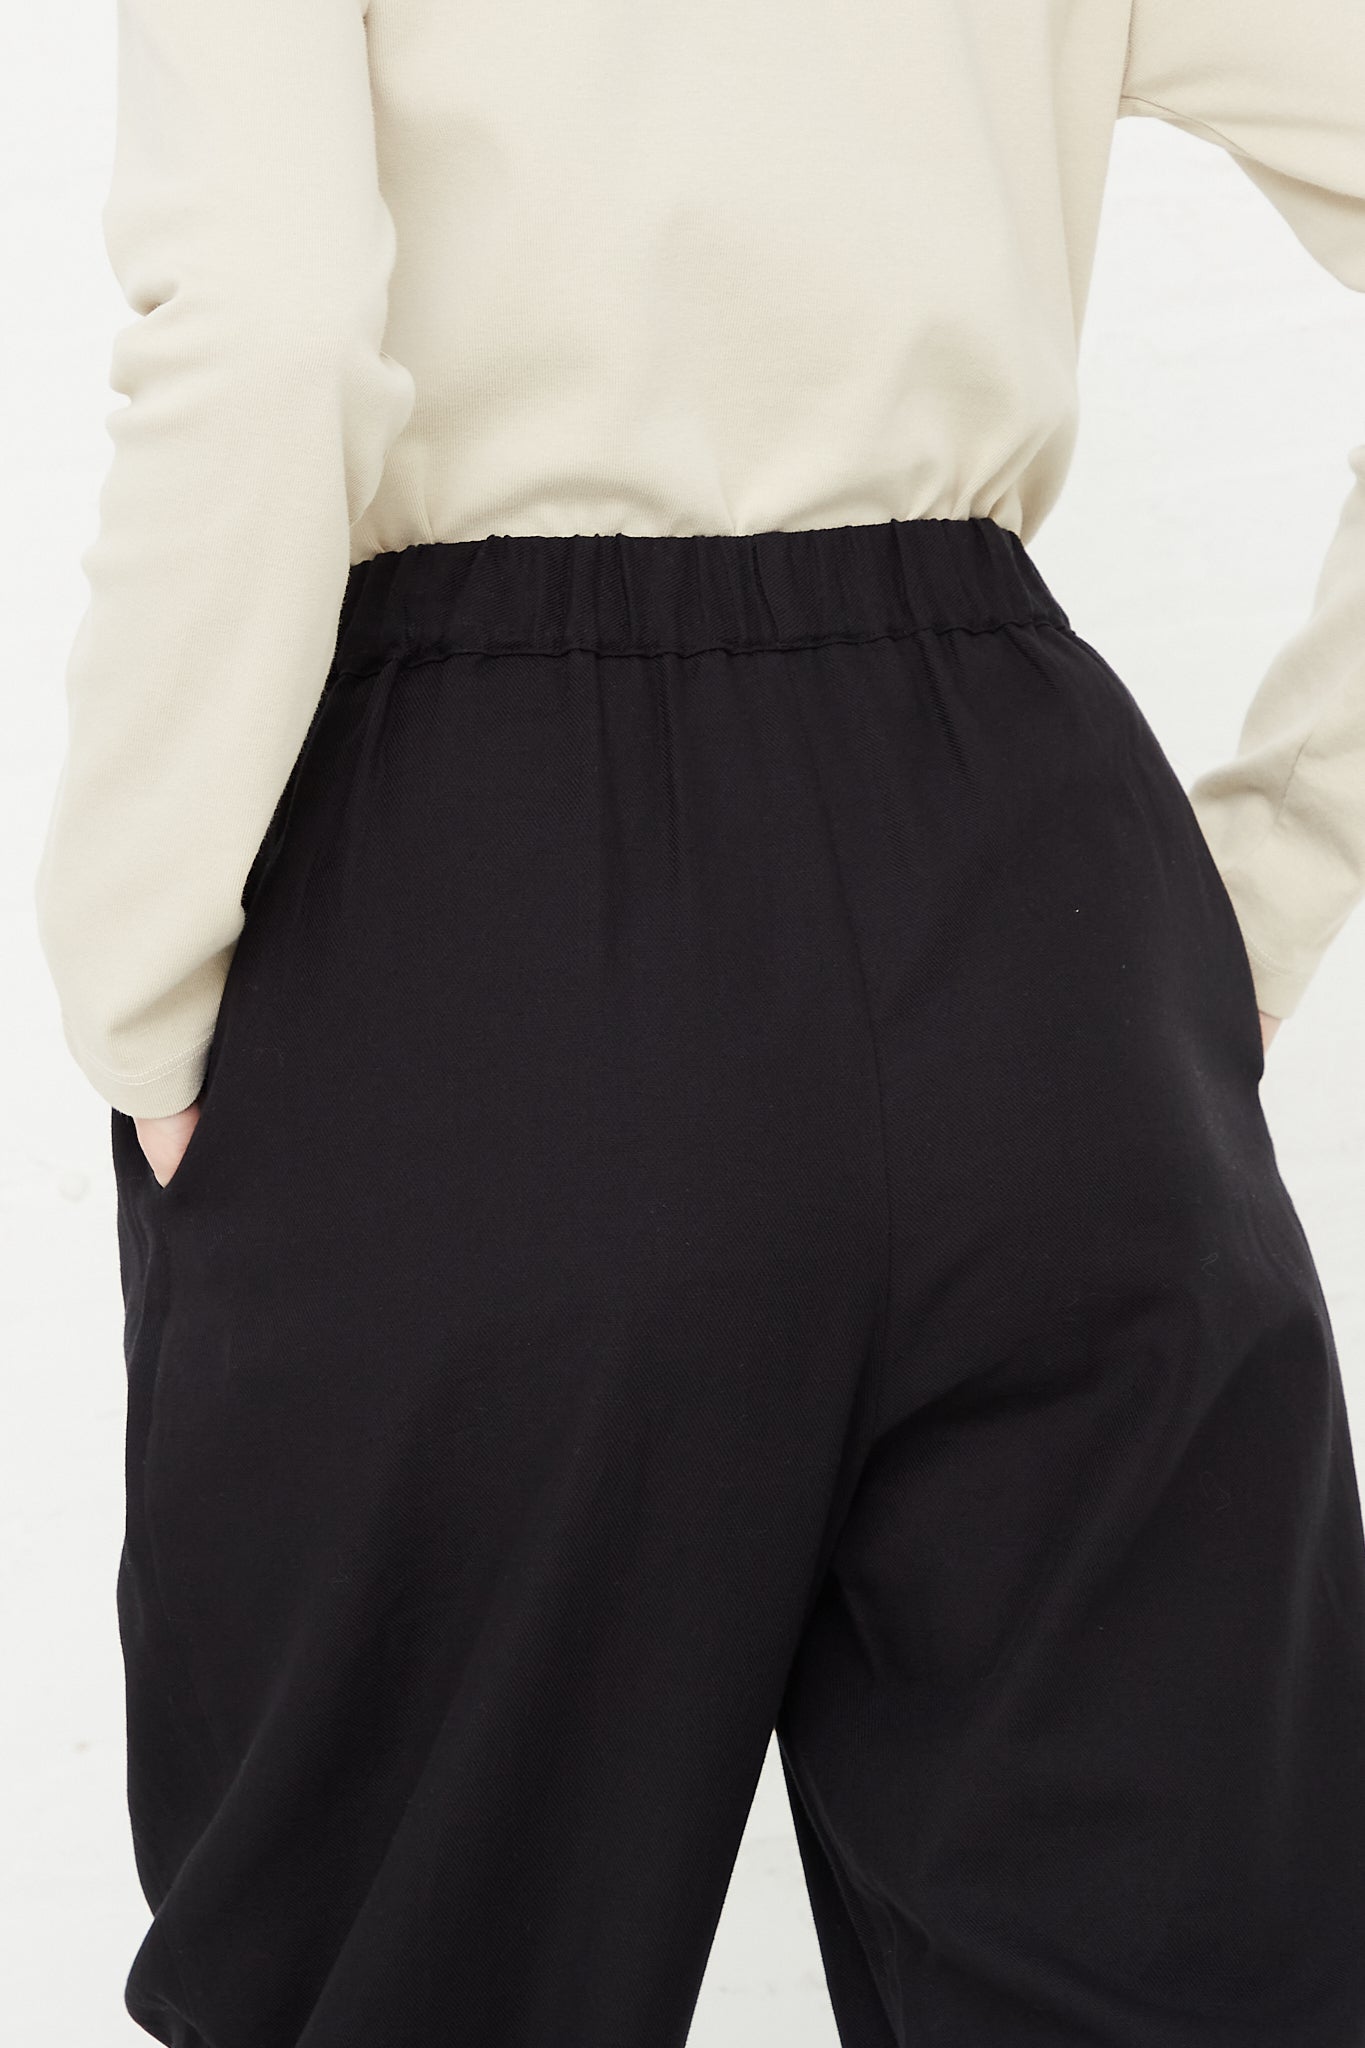 Cotton Twill Draped Pants in Black by Black Crane for Oroboro Back Upclose